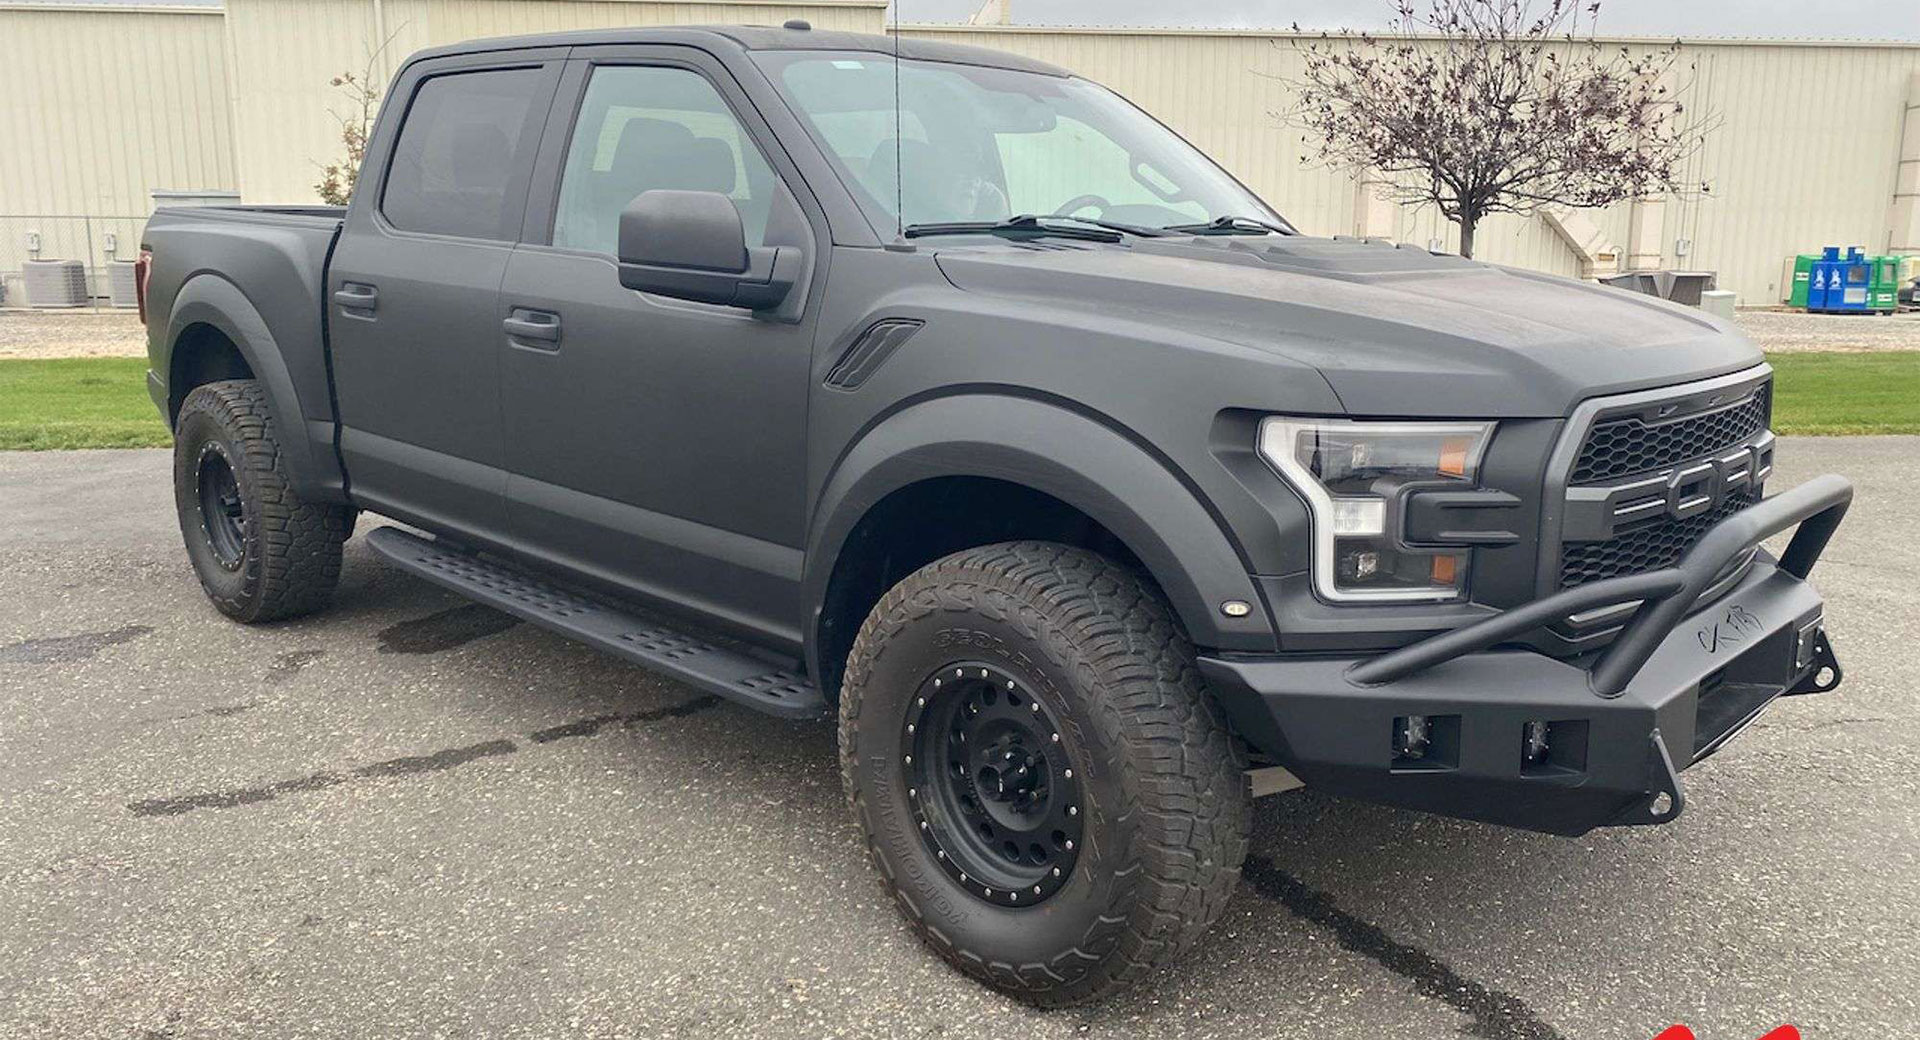 Kanye West Is Selling Six Matte Black Ford Trucks And SUVs